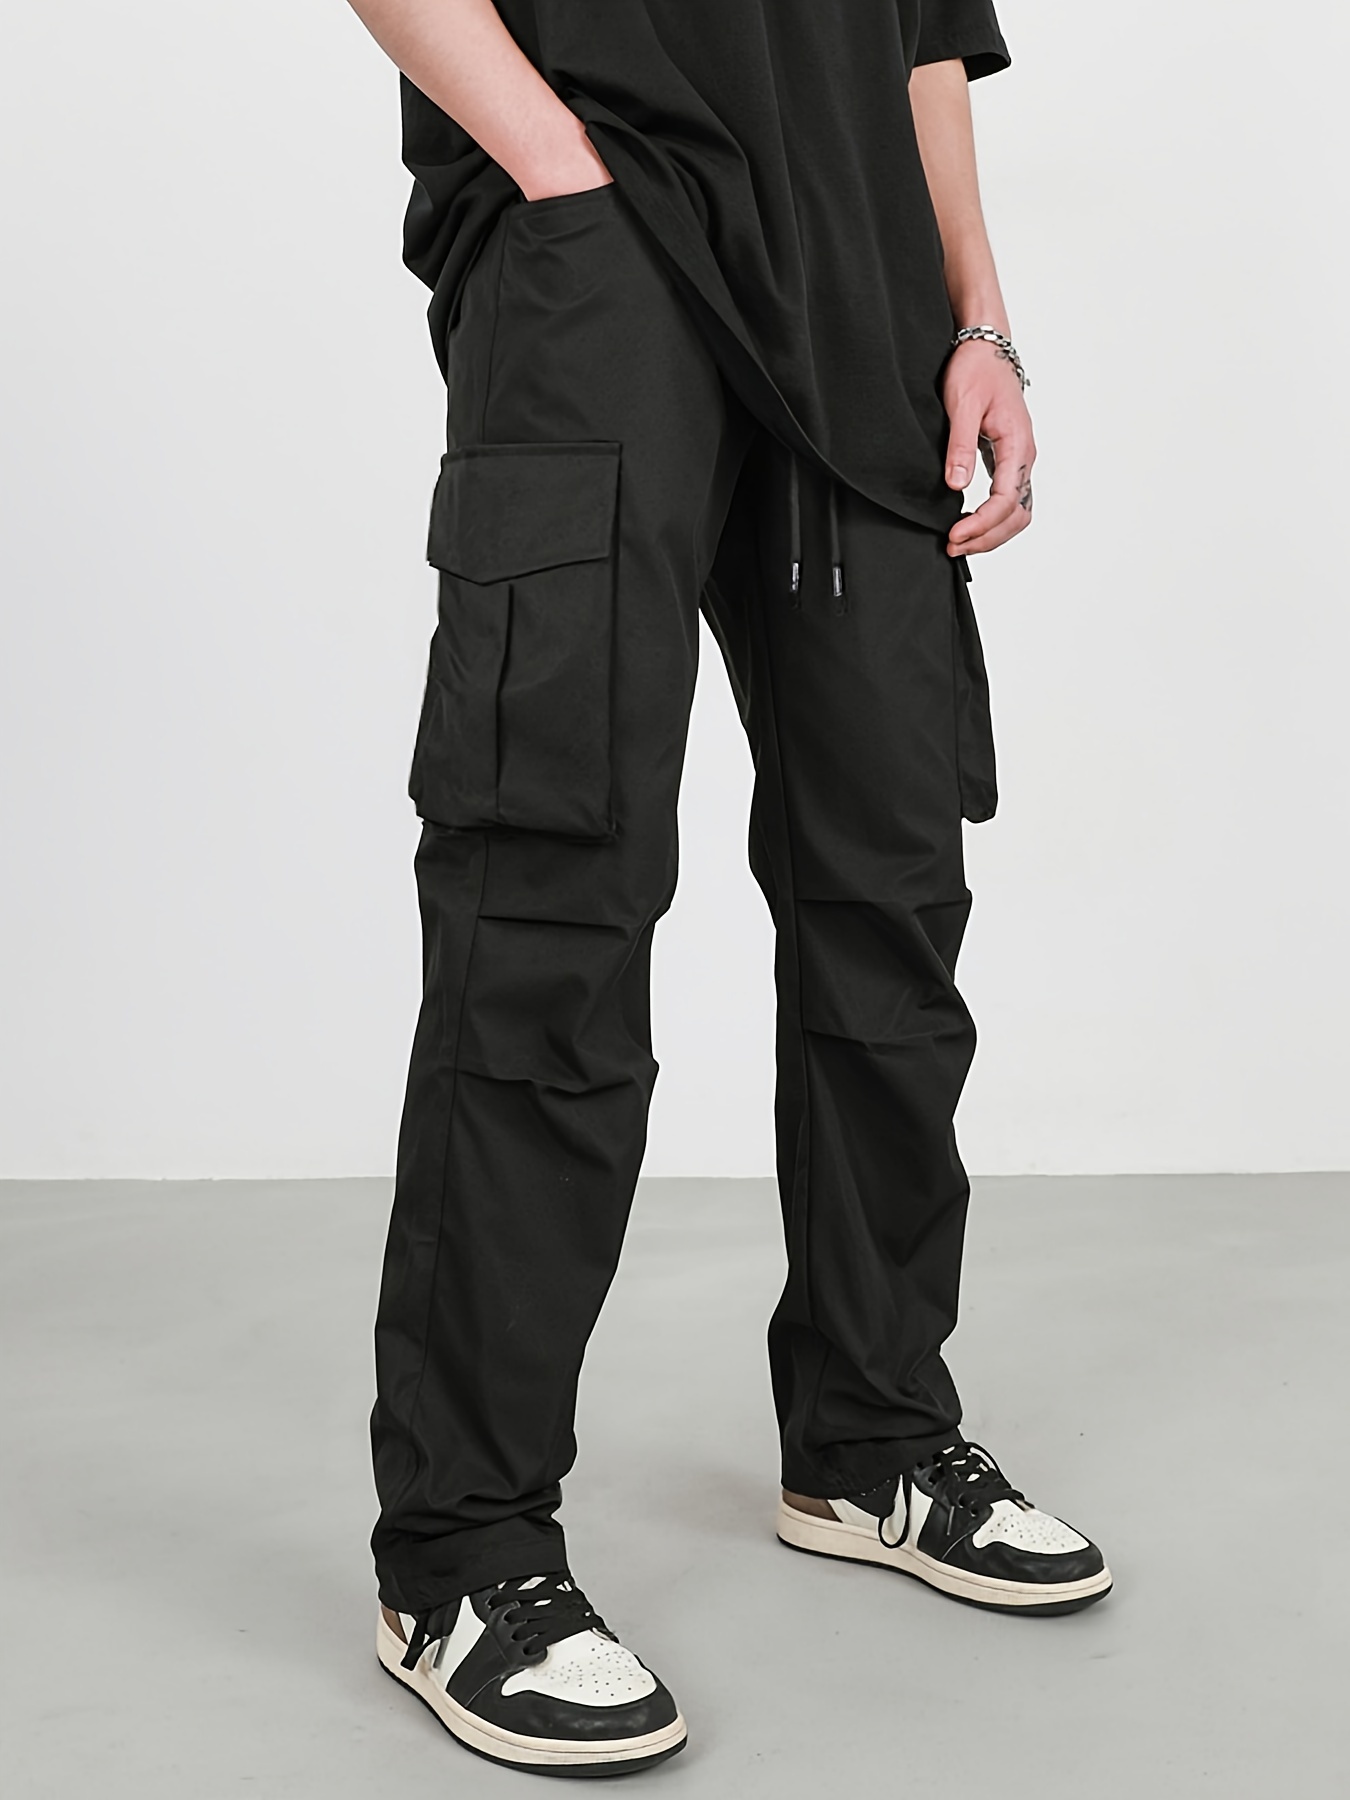 mnml - V263 Baggy Denim + more styles are available for a discounted price  during our Warehouse Sale, Shop now on mnml.la